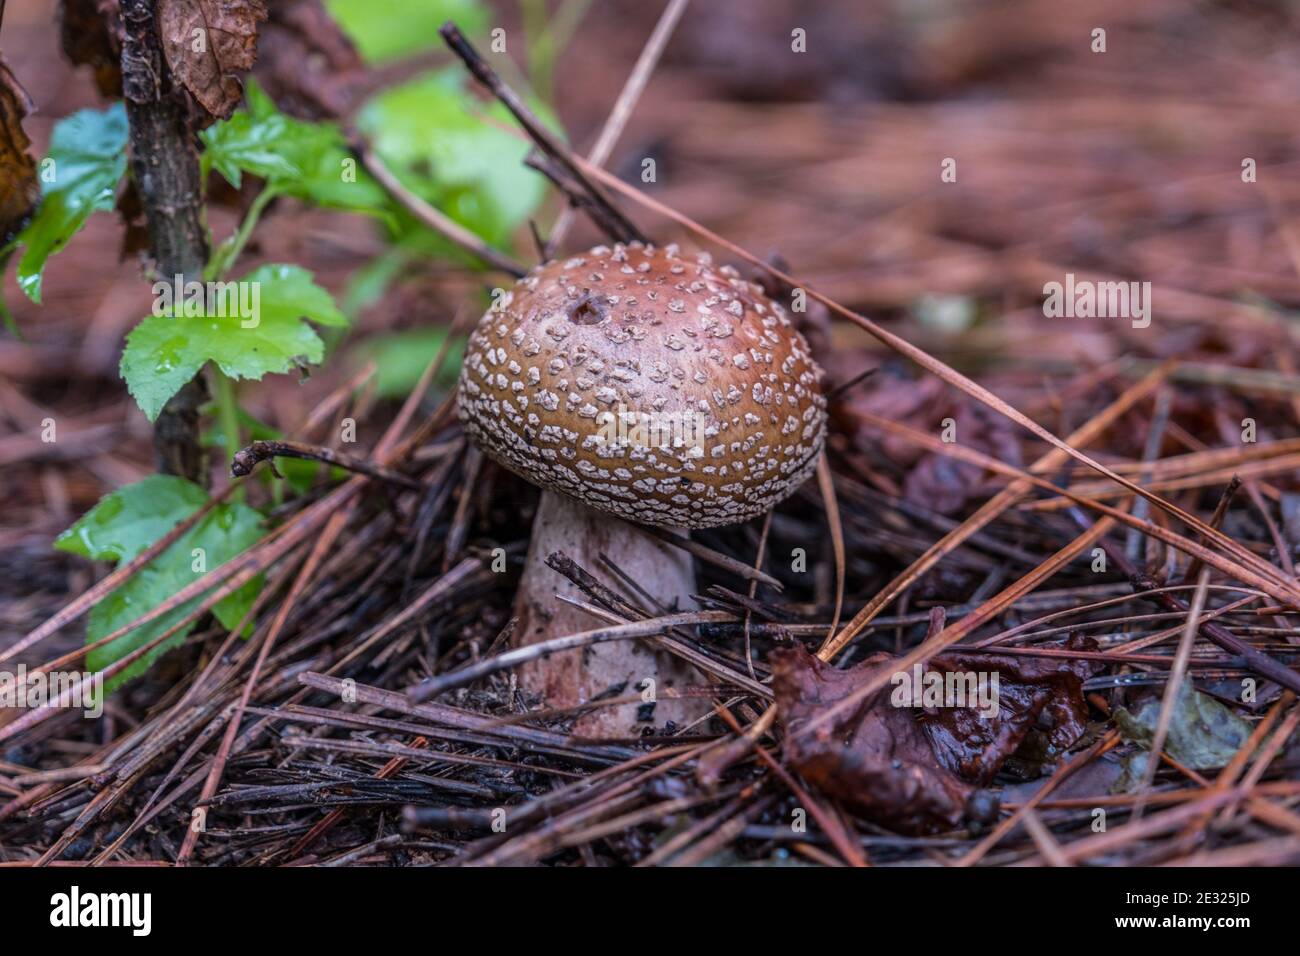 One dark orange speckled mushroom emerging from the forest floor surrounded by wet needles and decaying leaves in summertime Stock Photo